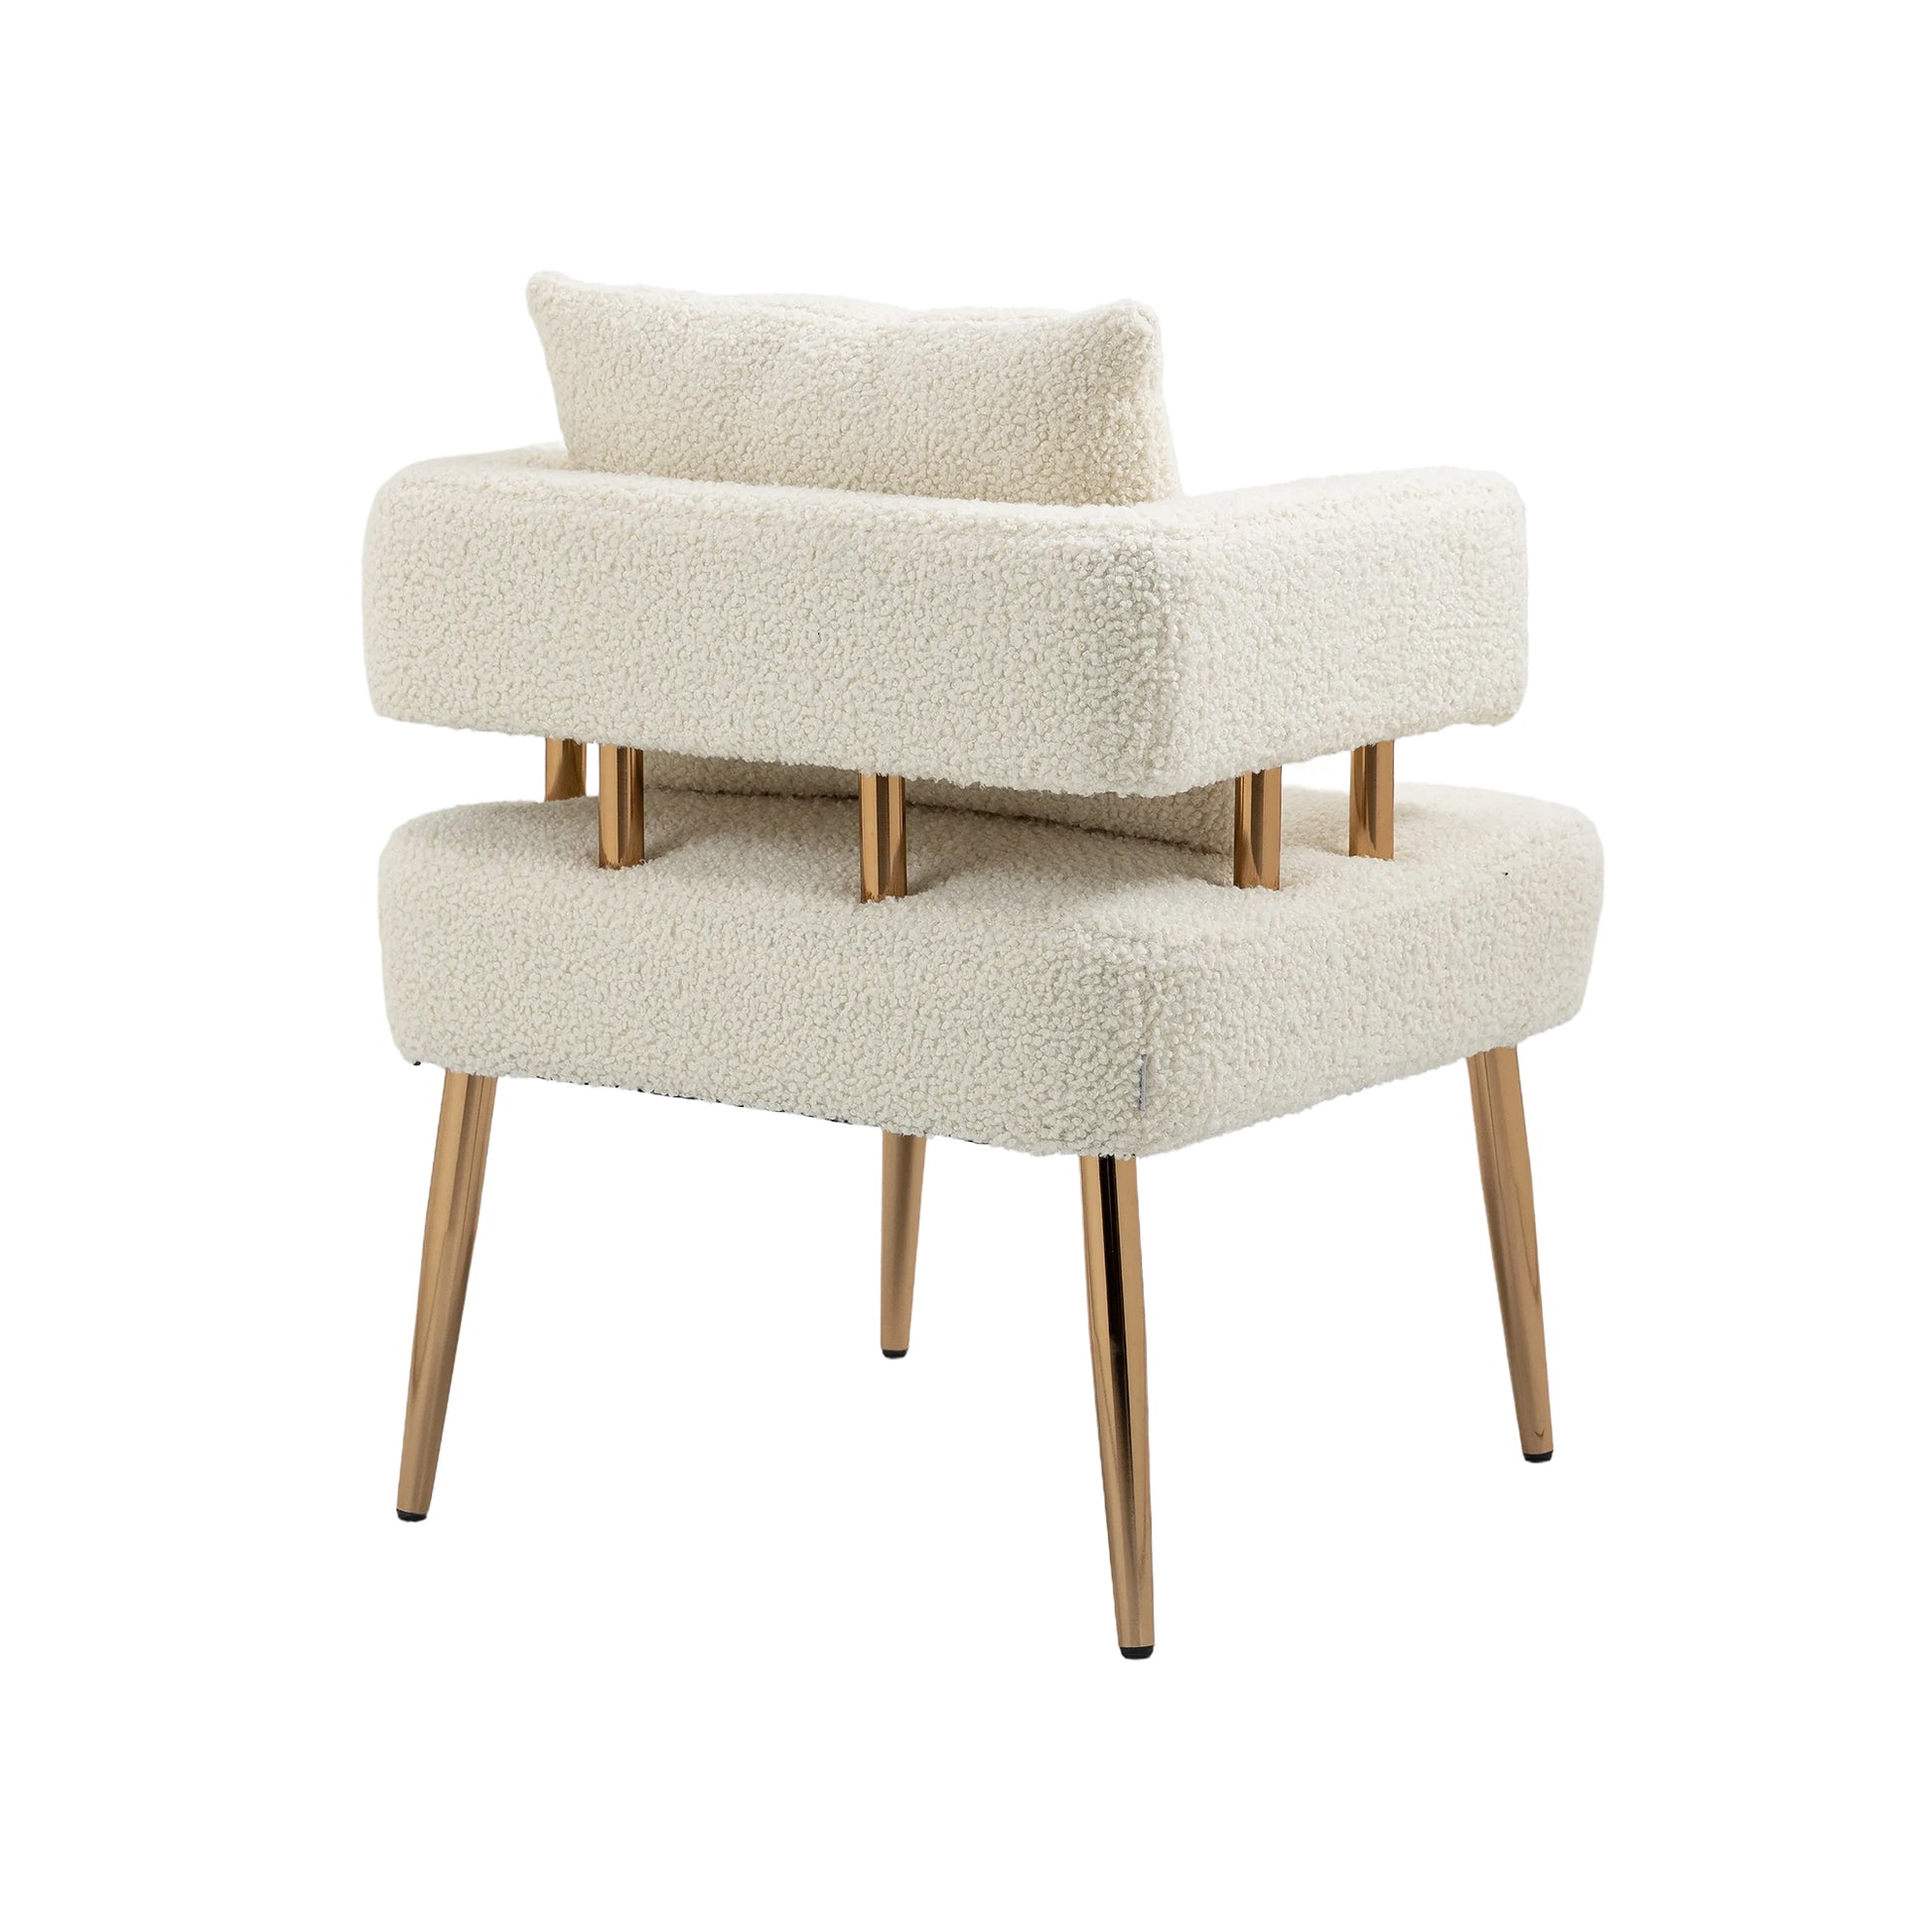 COOLMORE Accent Chair ,leisure single chair with Golden feet - Enova Luxe Home Store